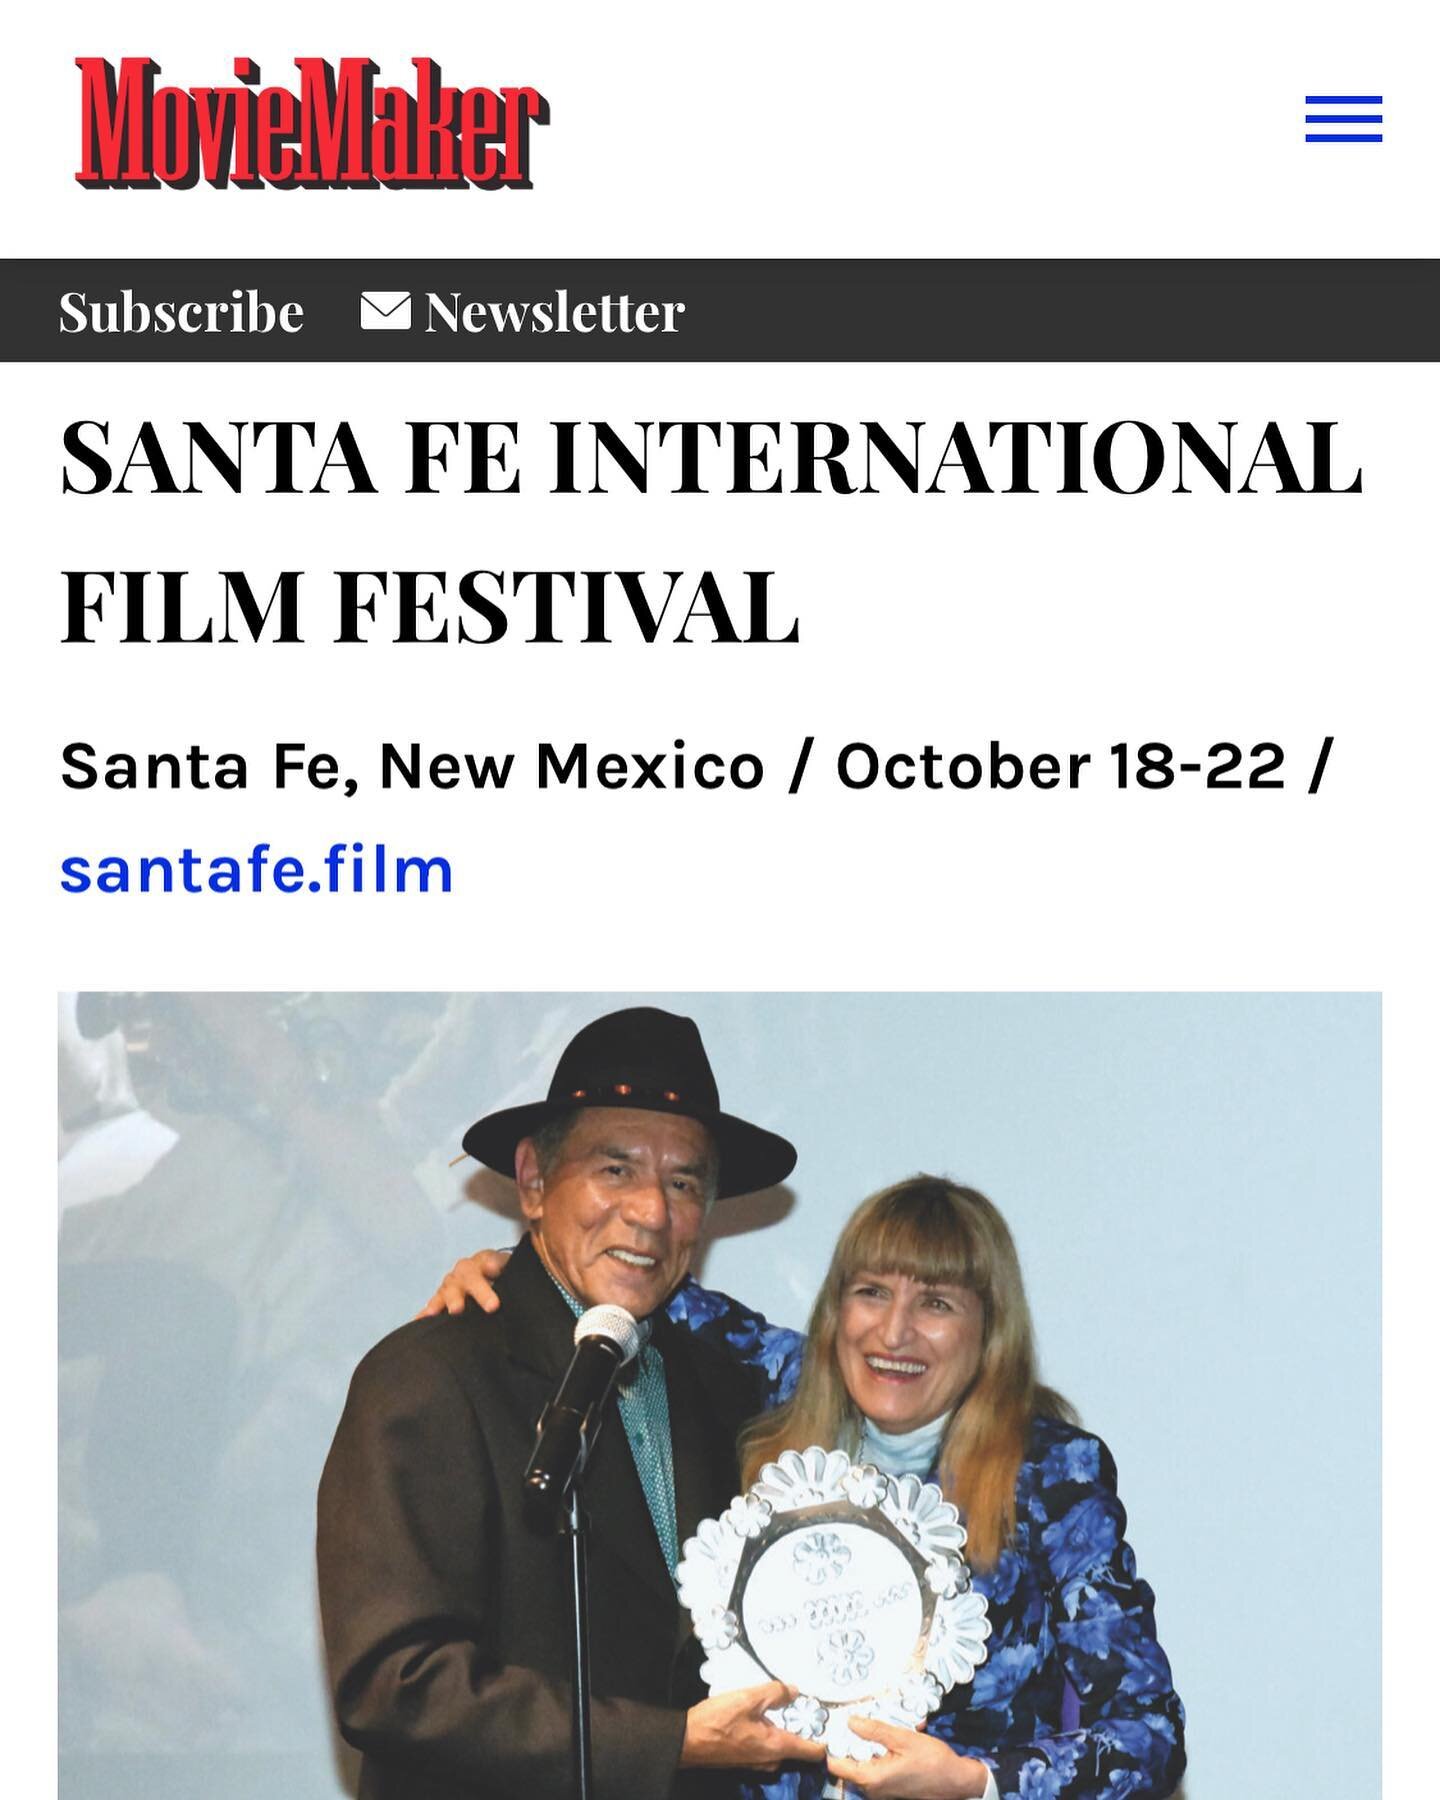 Based in the No. 1 smaller city on our list of the Best Places to Live and Work as a Moviemaker, Santa Fe blends an artistic spirit with natural wonder all around and understated elegance. Attending the festival is an excellent way to get to know a t